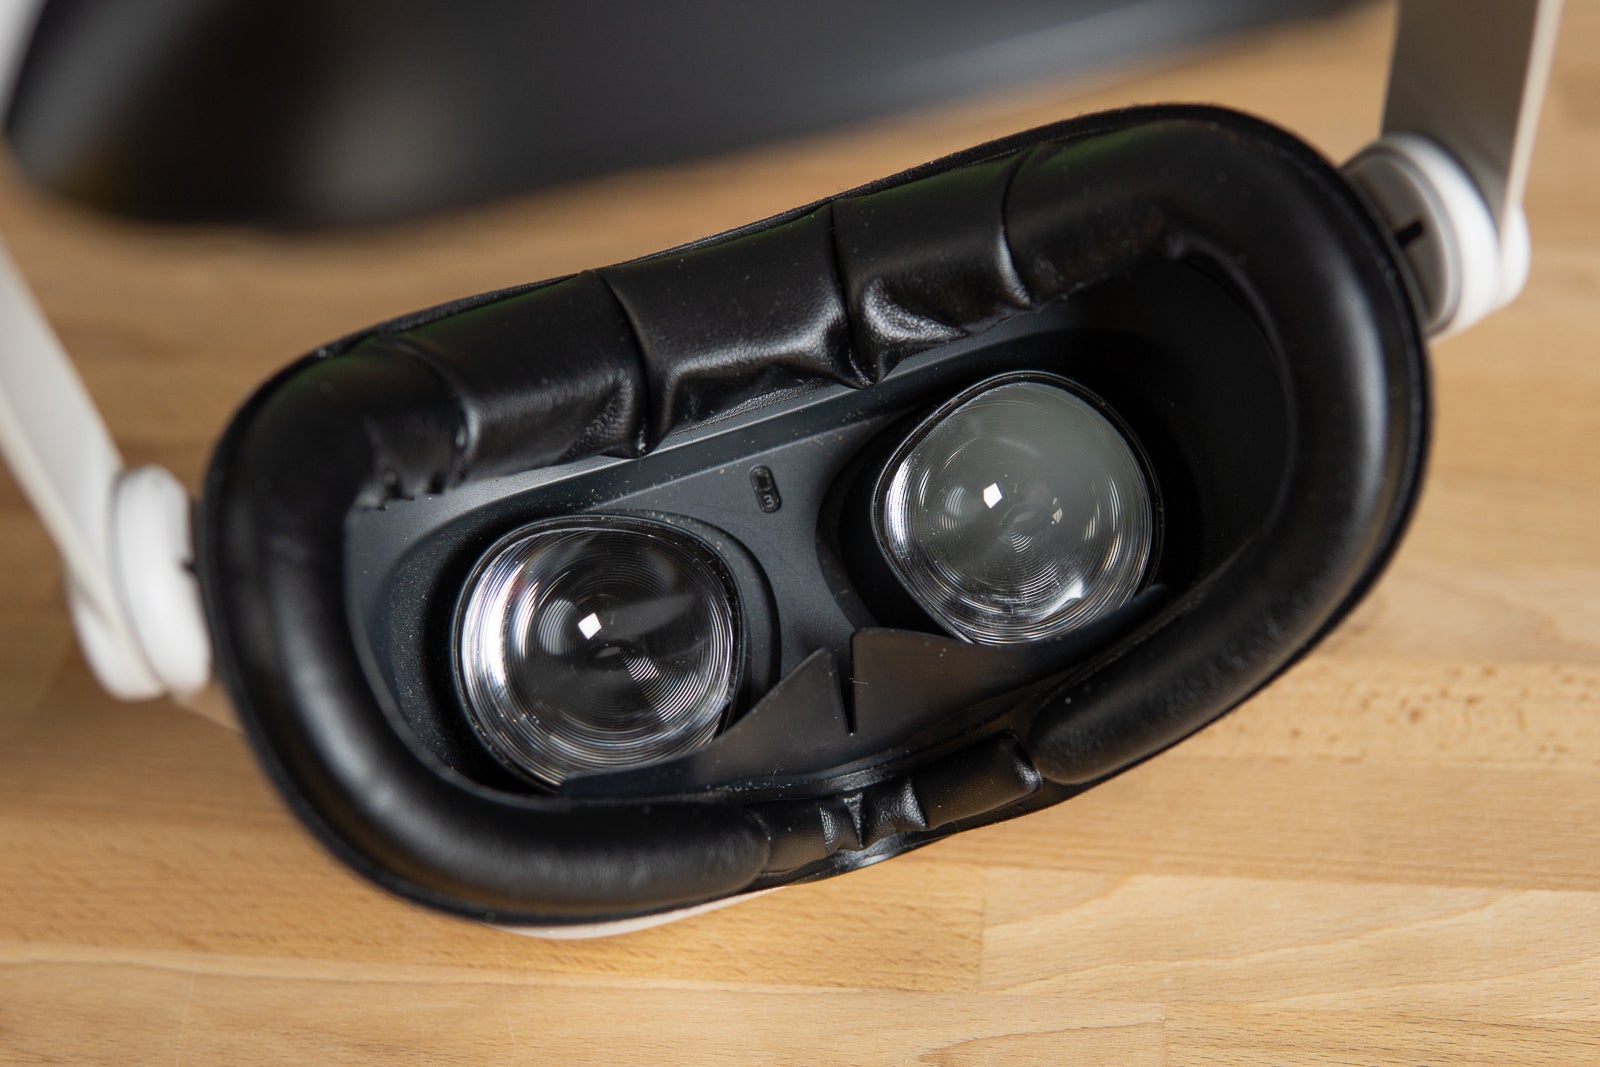 Oculus Quest 2's lenses are adjustable to fit different IPDs - Oculus Quest 2 long-term review: still worth it?